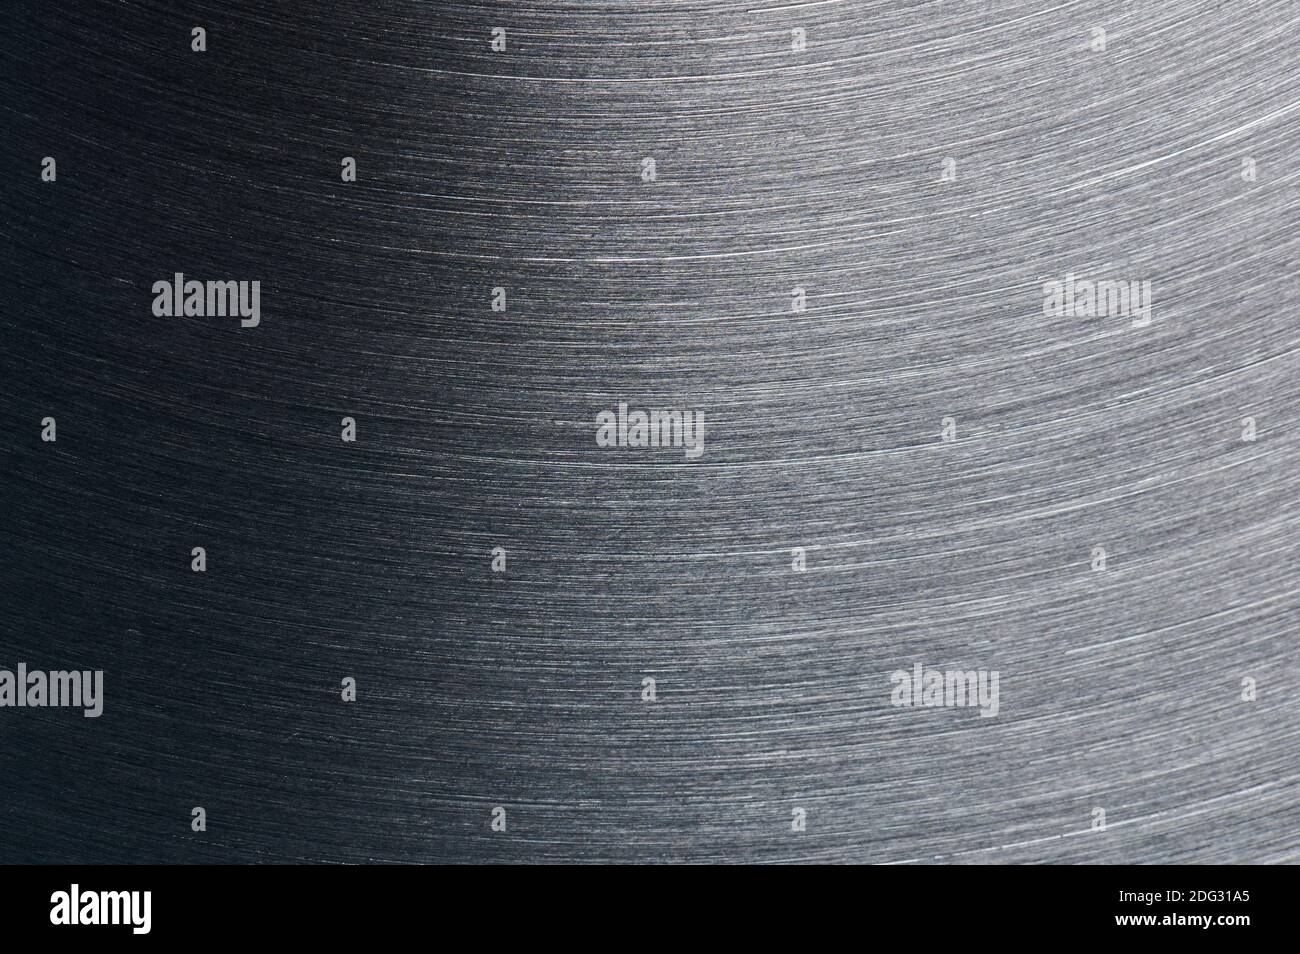 Clean grey brushed metal surface macro close up view Stock Photo